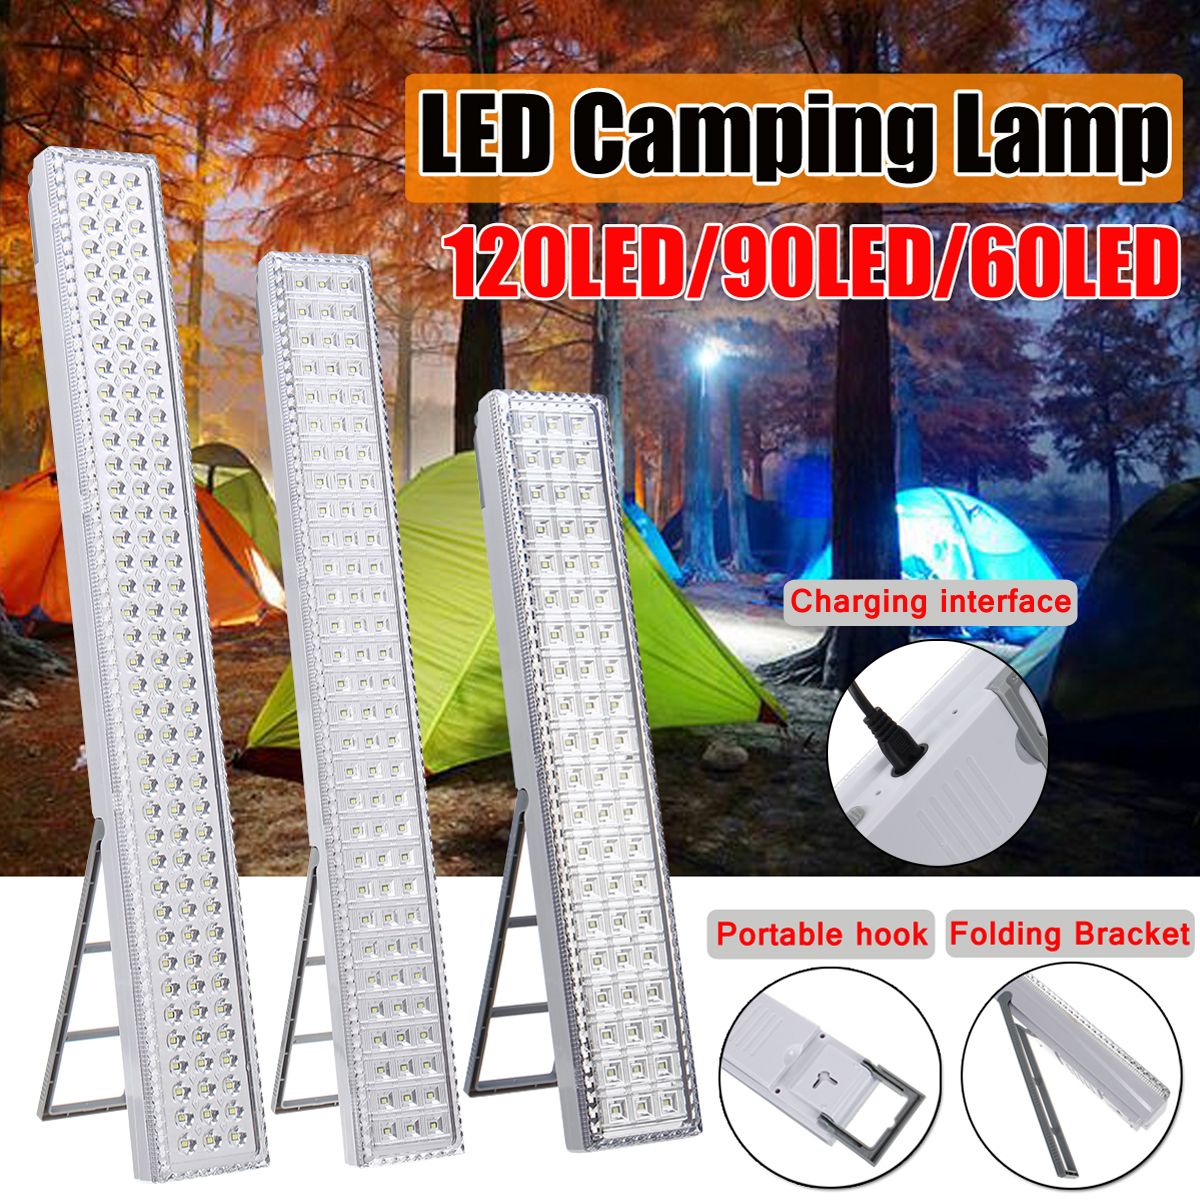 Portable-LED-Camping-Lantern-Tent-Light-Work-Rechargeable-Lamp-Fishing-Outdoor-1587960